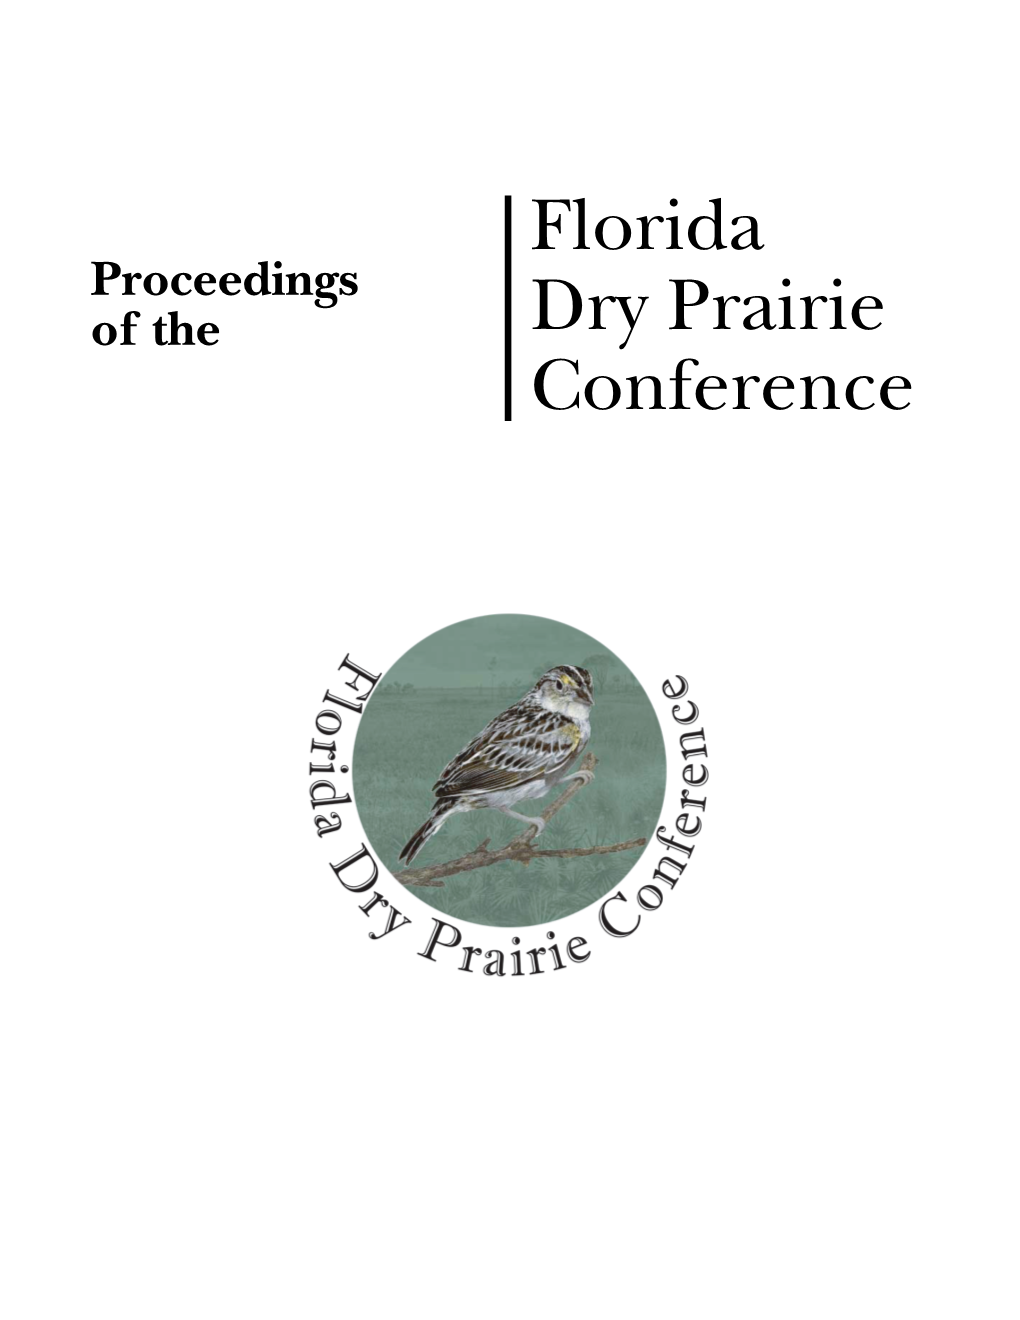 Florida Dry Prairie Conference